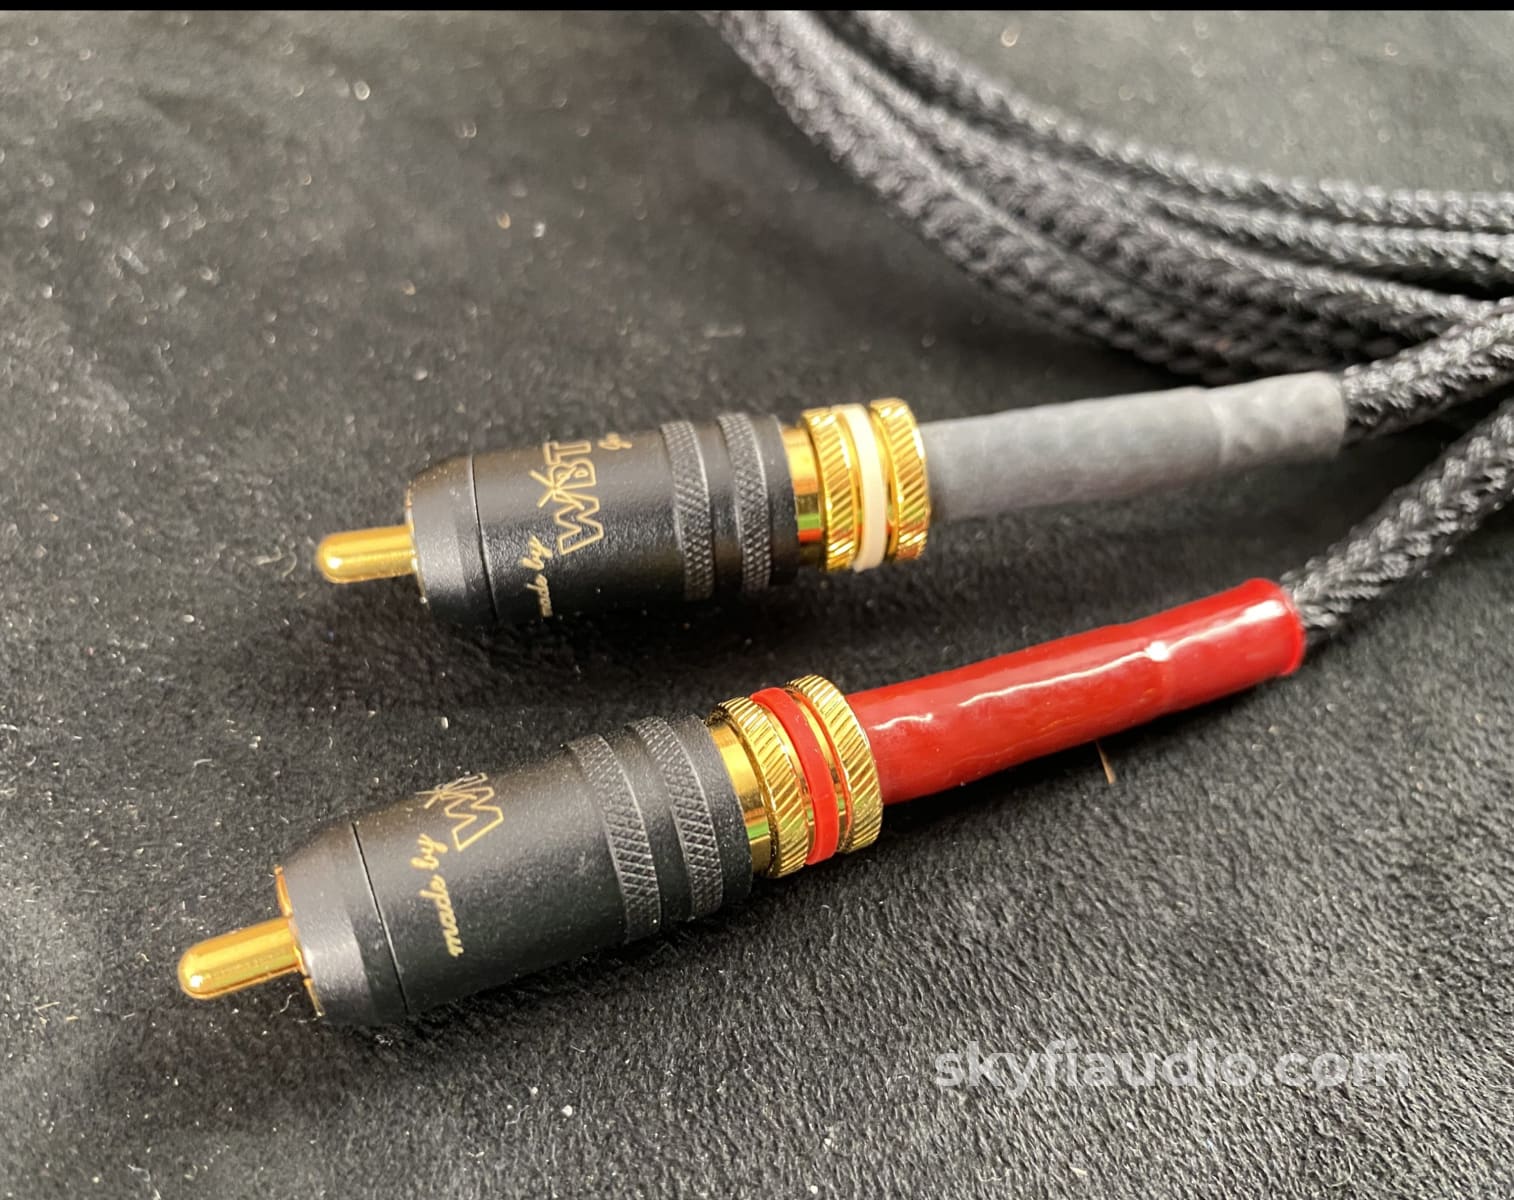 Totem Sinew Rca Cable Rare With High-End Wbt Connectors 1M Cables